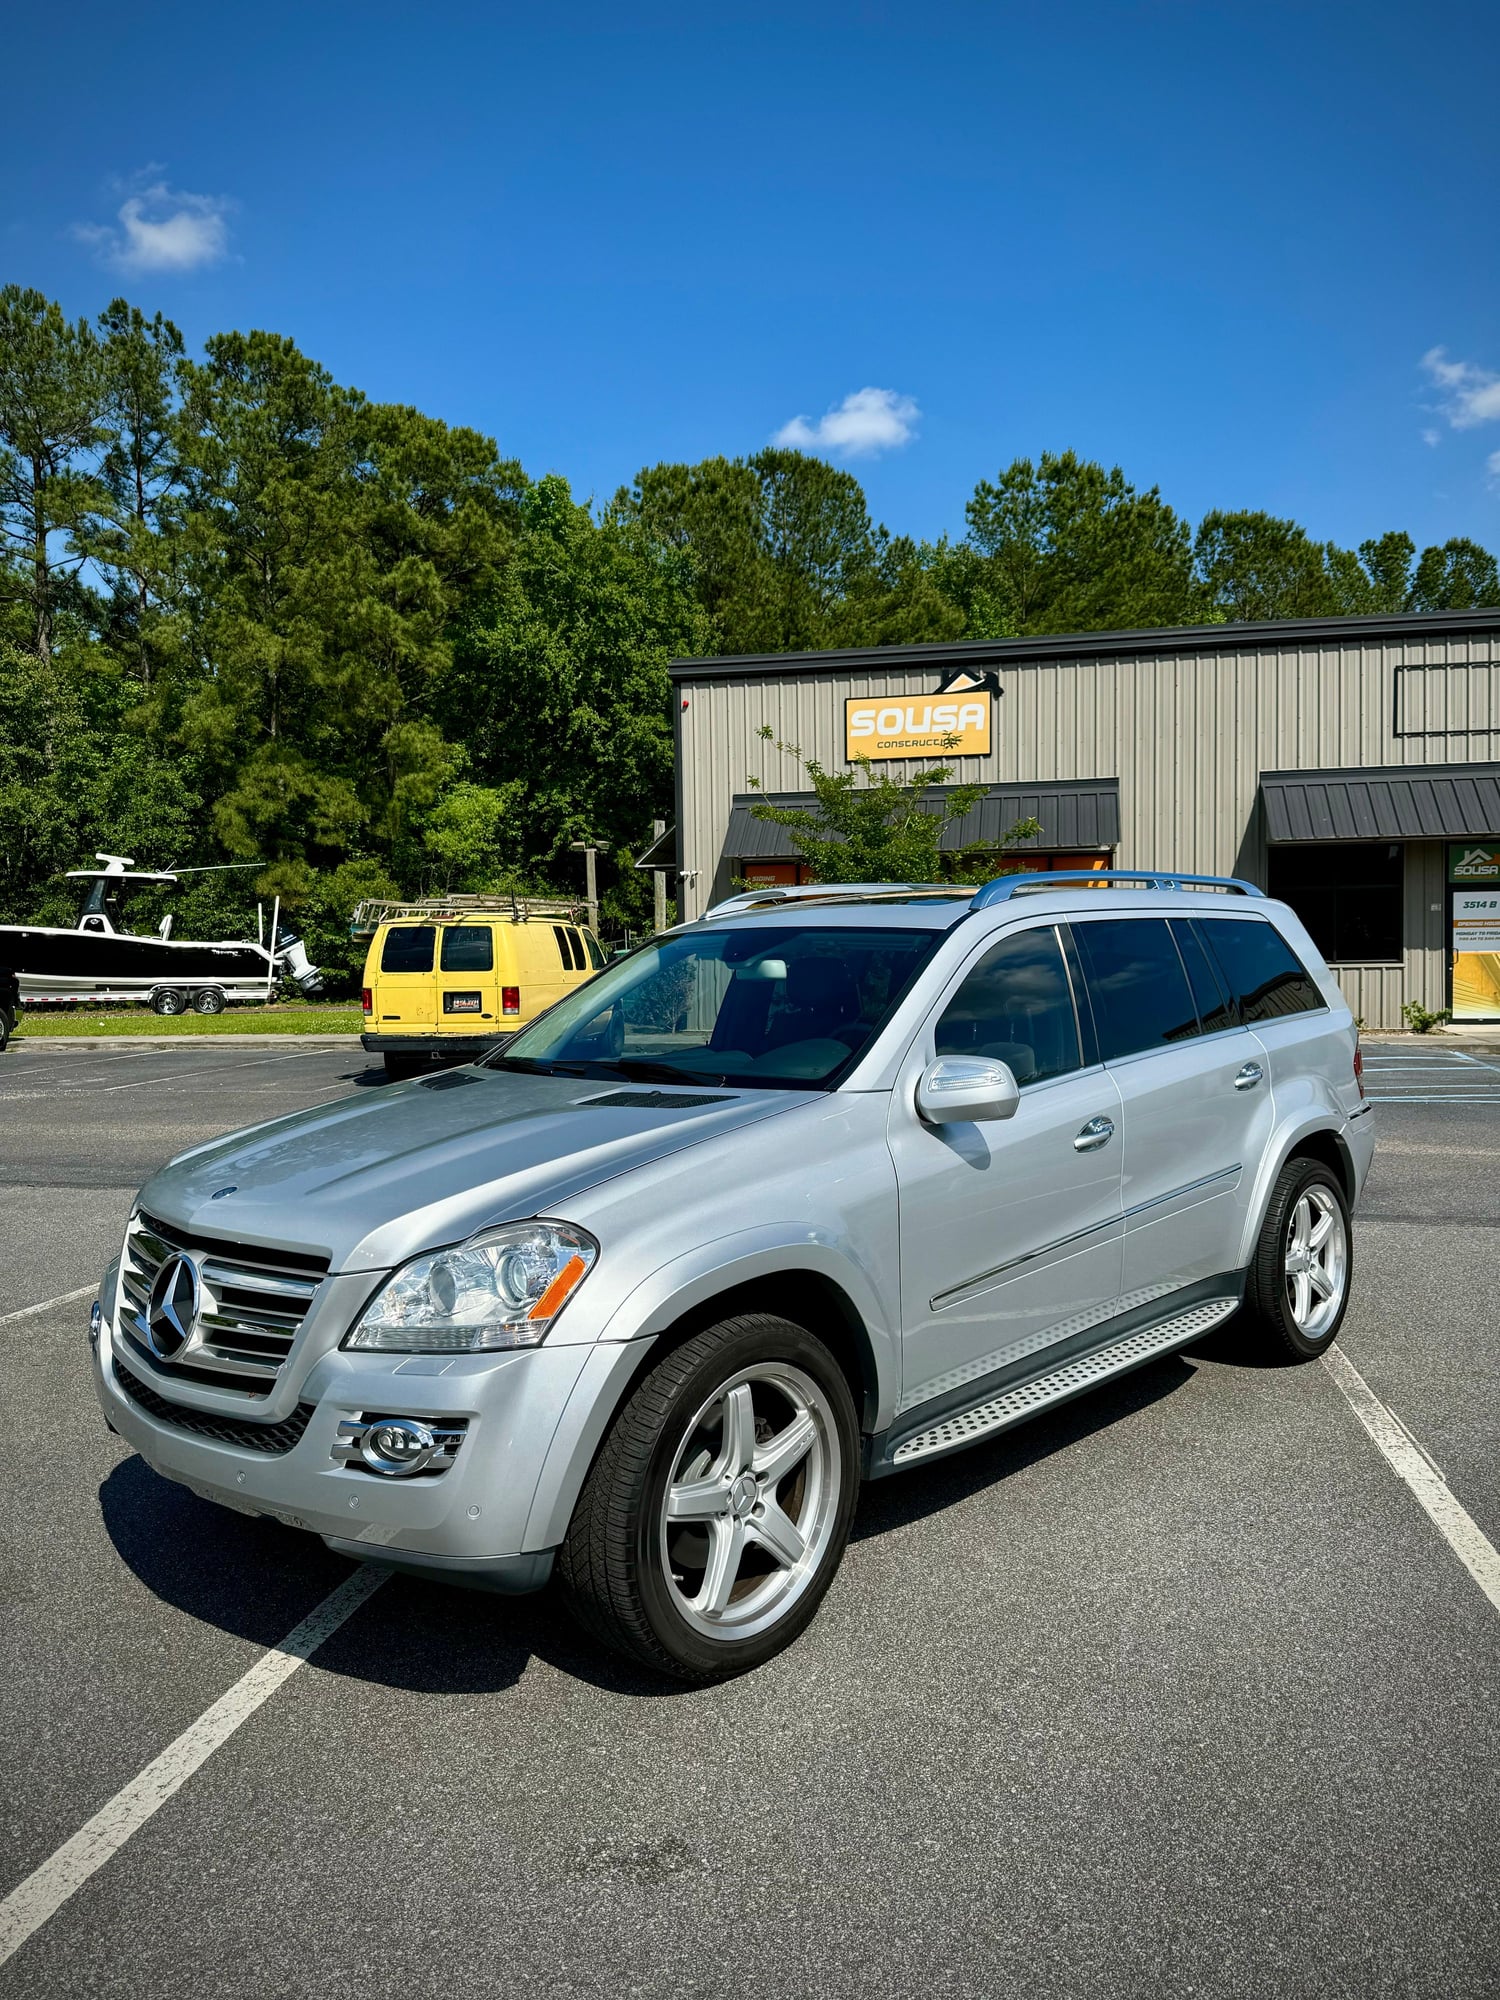 2009 Mercedes-Benz GL550 - 2009 GL550 w/ all service history since new - Used - VIN 4JGBF86E09A527063 - 97,000 Miles - 8 cyl - AWD - Automatic - SUV - Silver - Summerville, SC 29483, United States